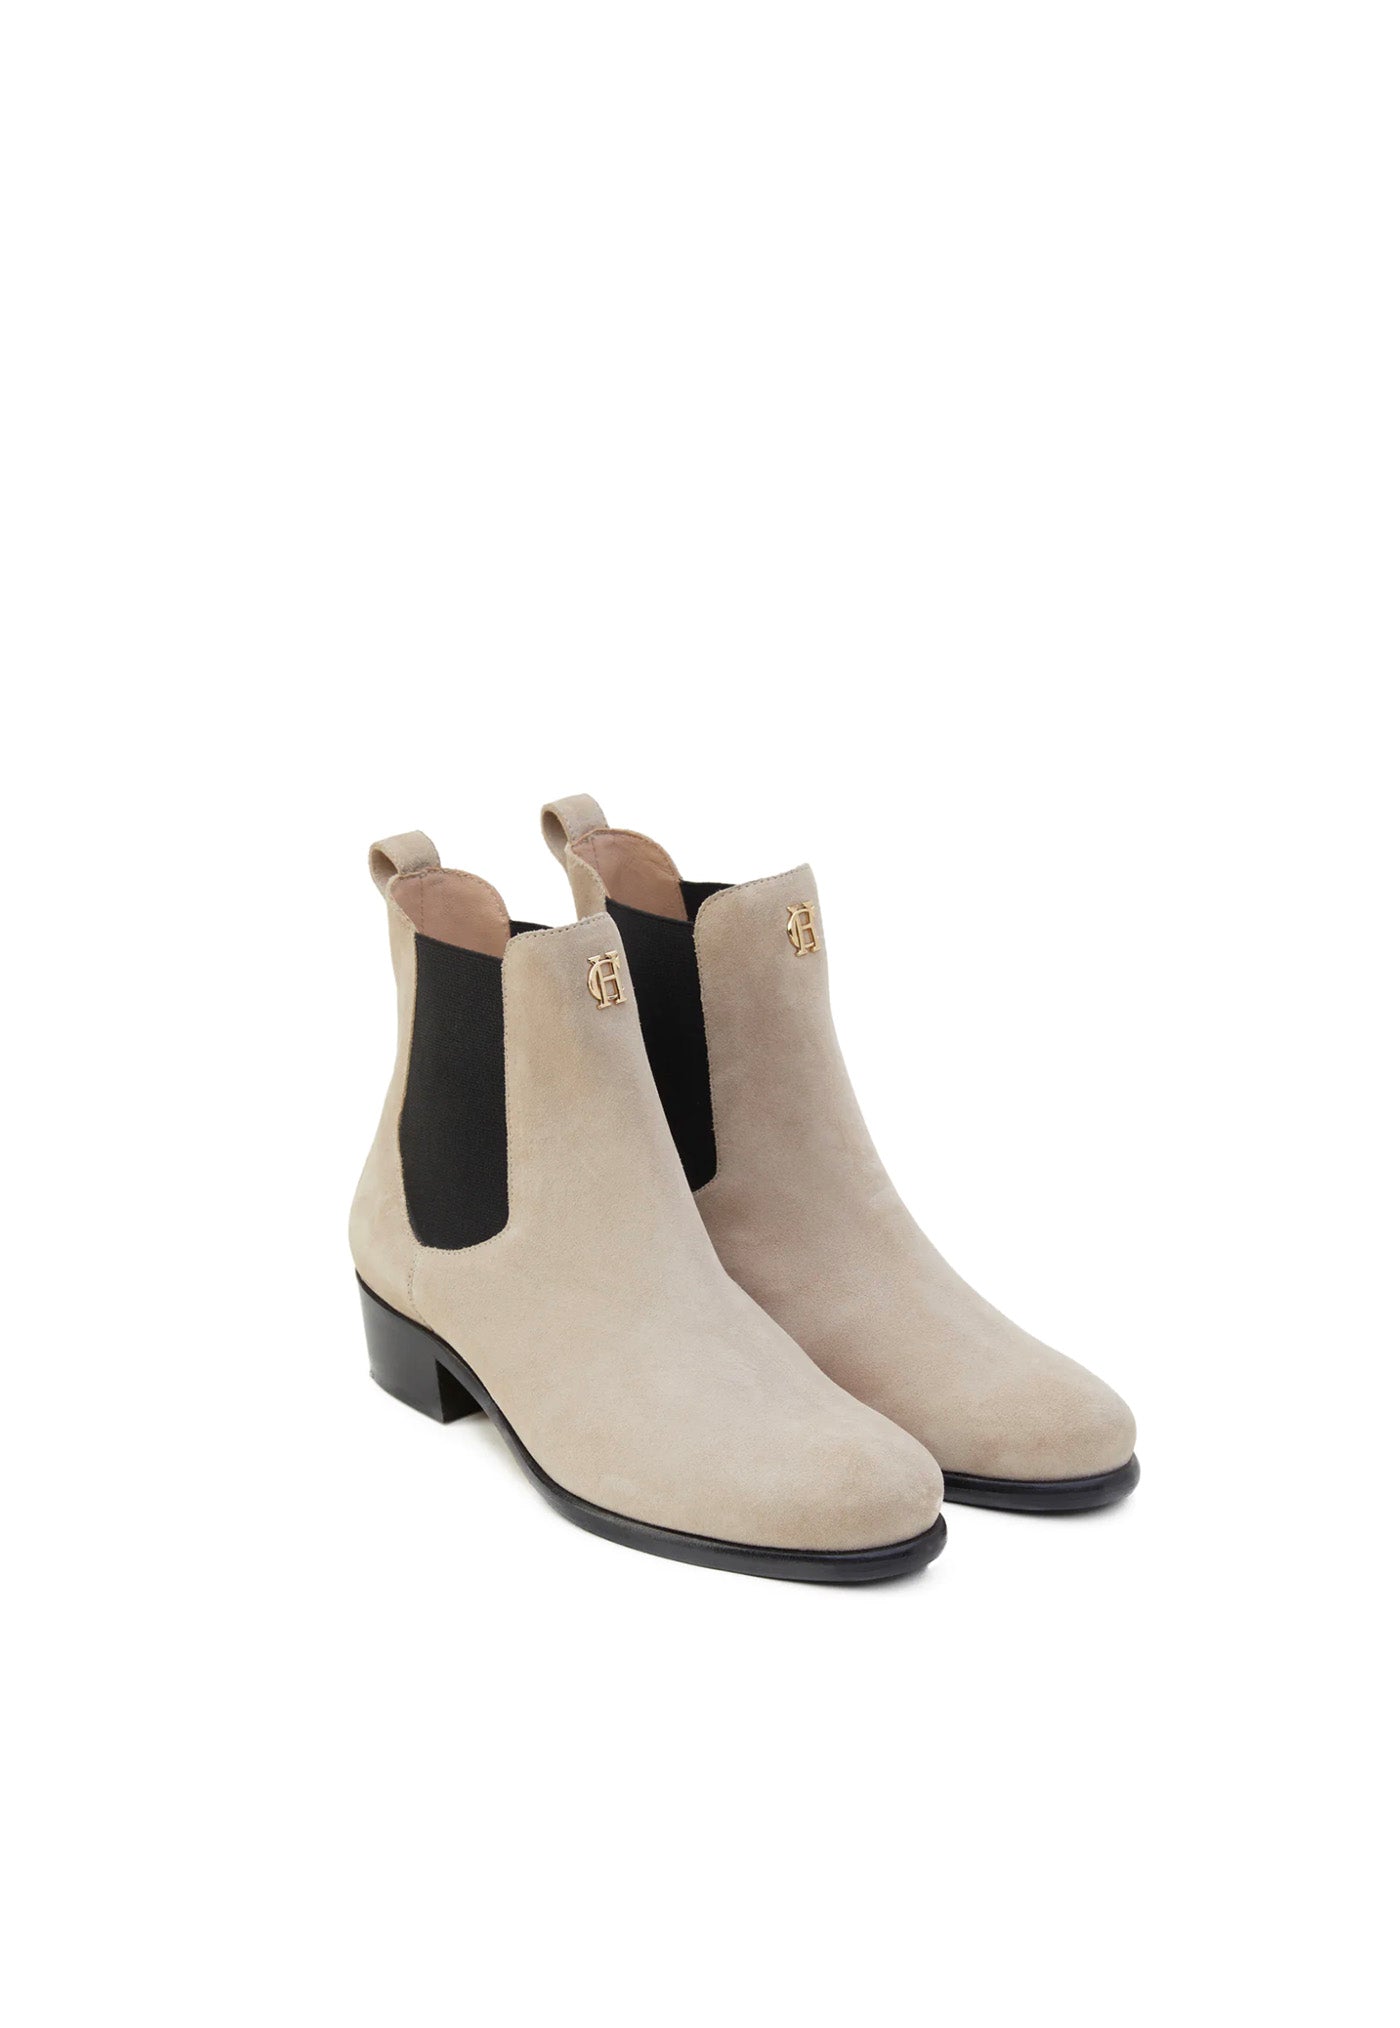 Chelsea Low Boot - Taupe Suede sold by Angel Divine